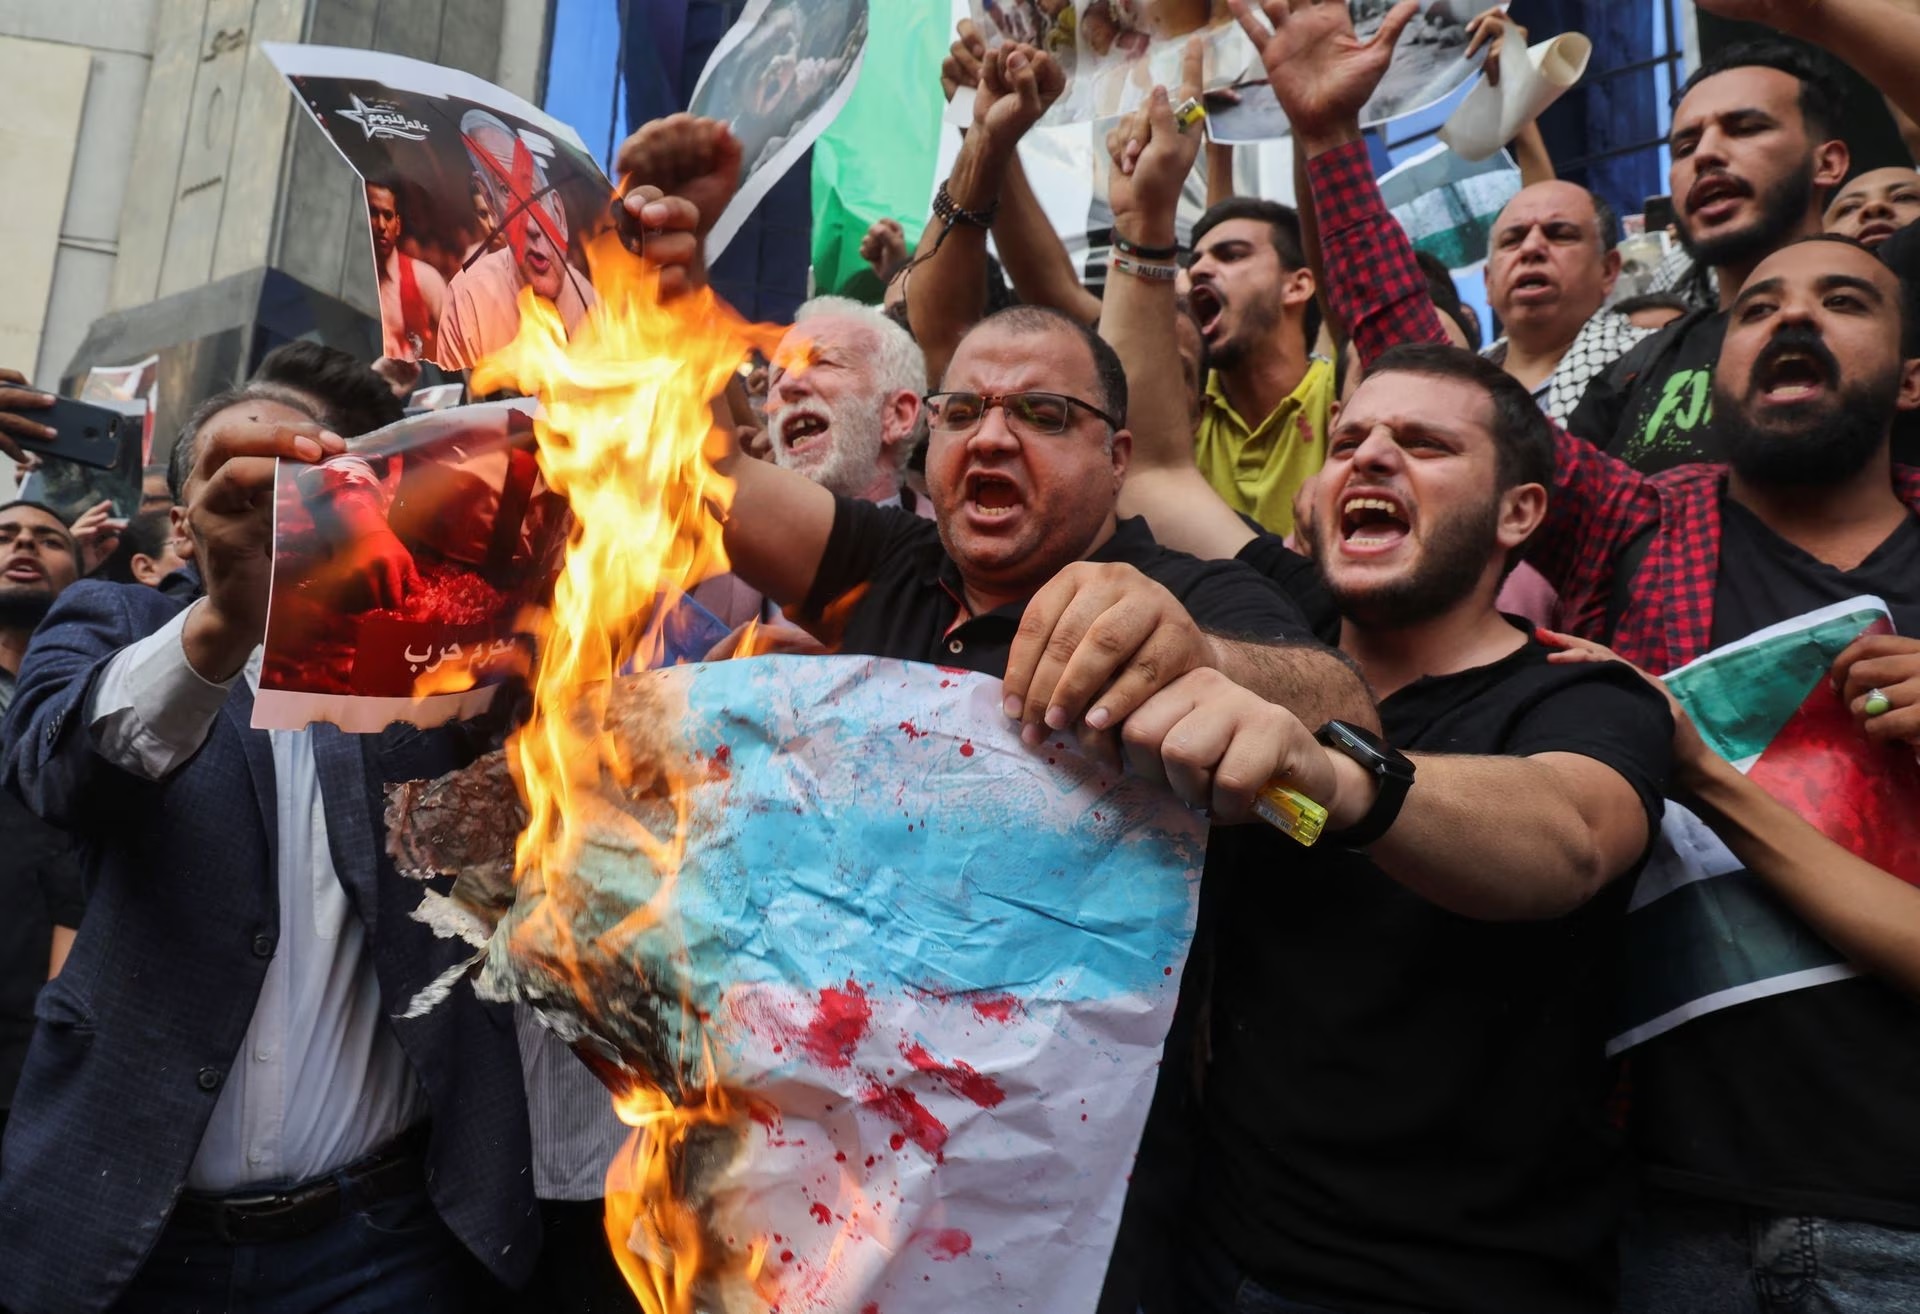 Egyptians shout slogans against Israel and the USA in support of Palestinians for those killed in a blast at Al-Ahli hospital in Gaza.